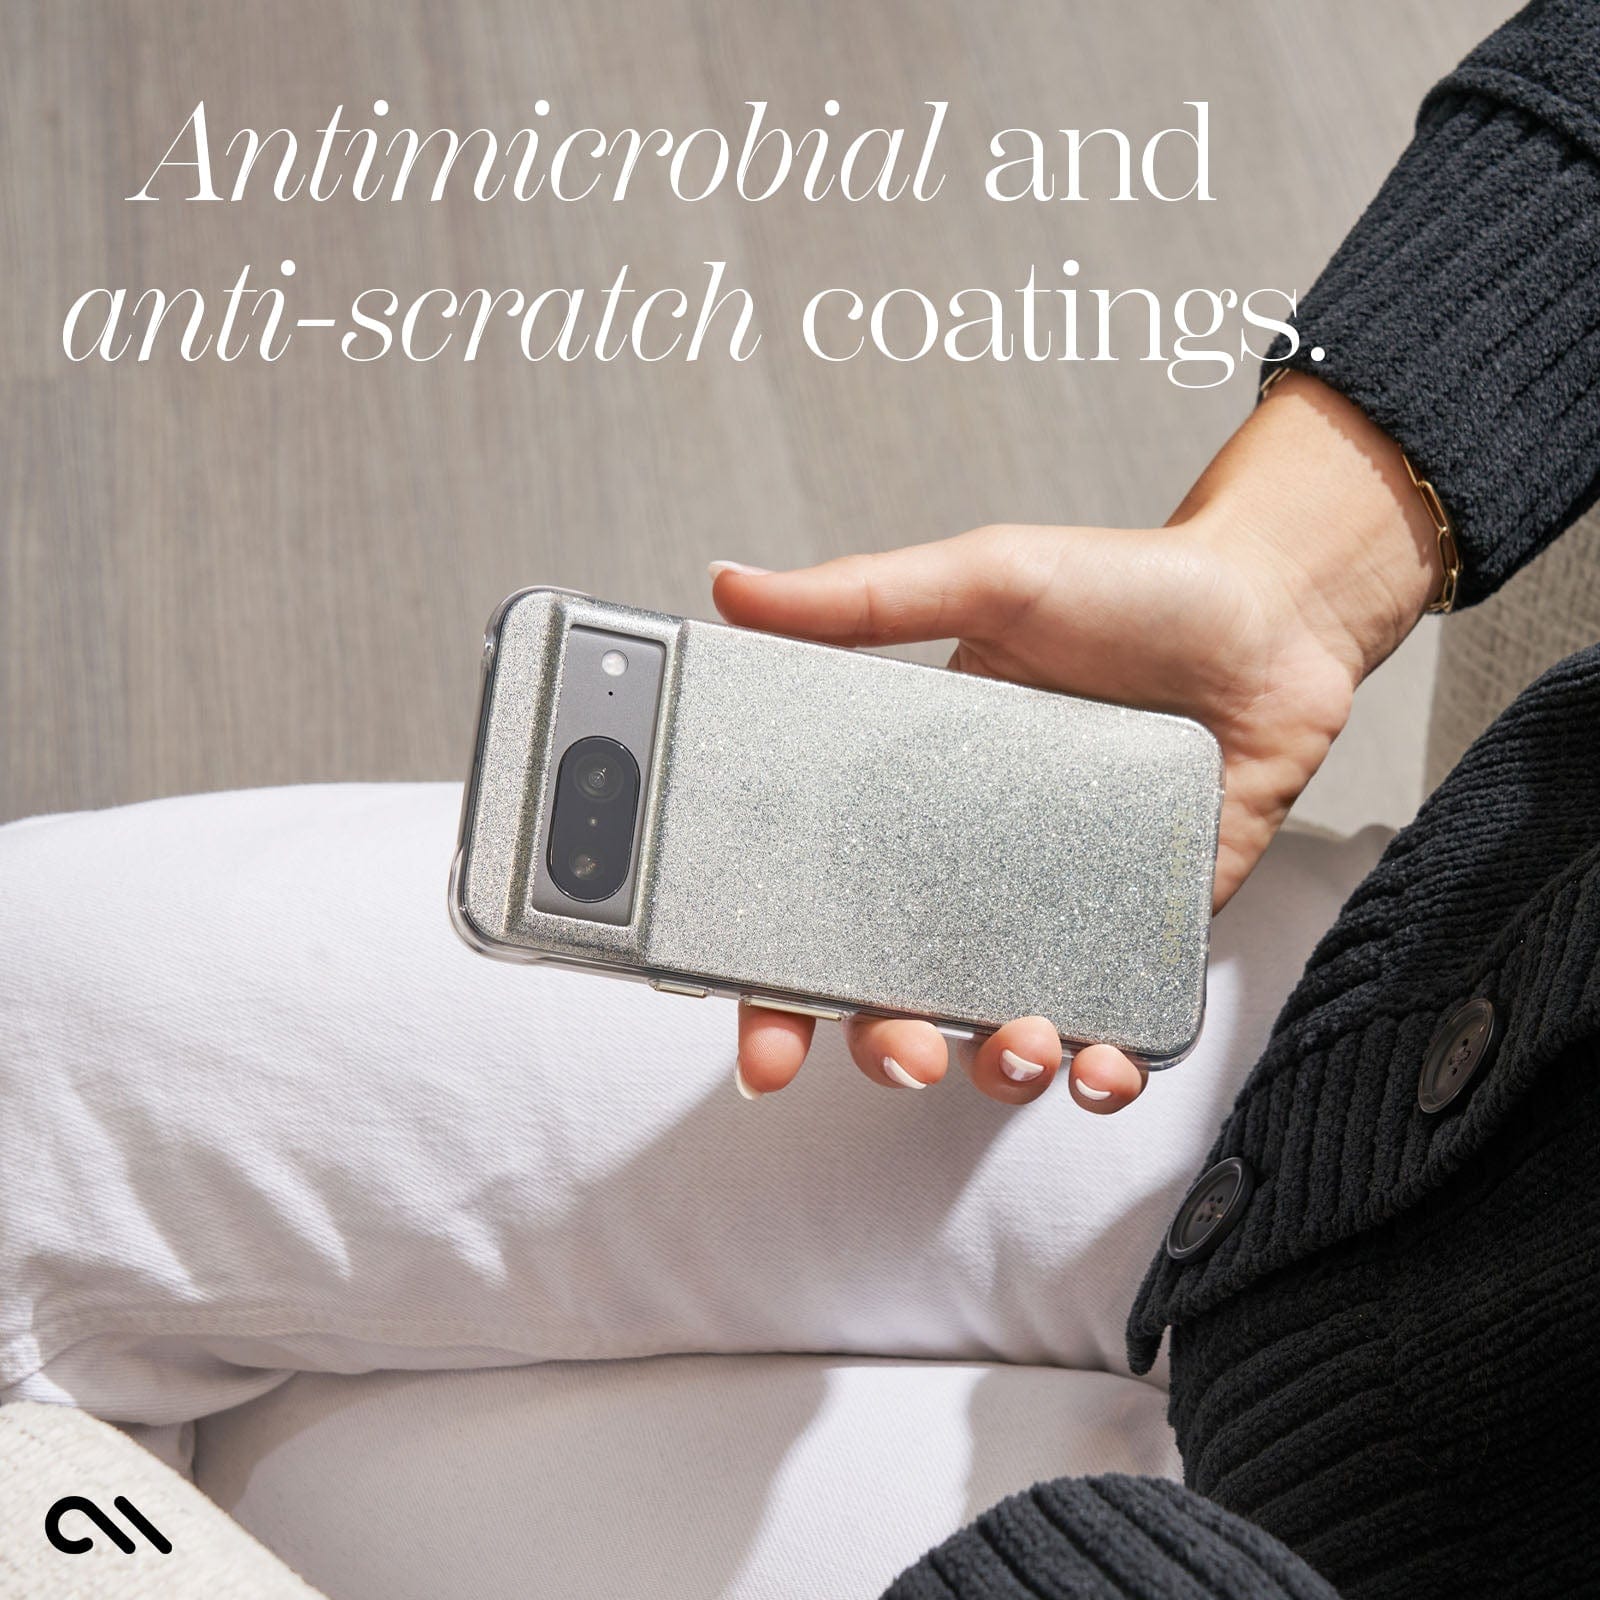 ANTIMICROBIAL ANTI-SCRATCH COATINGS